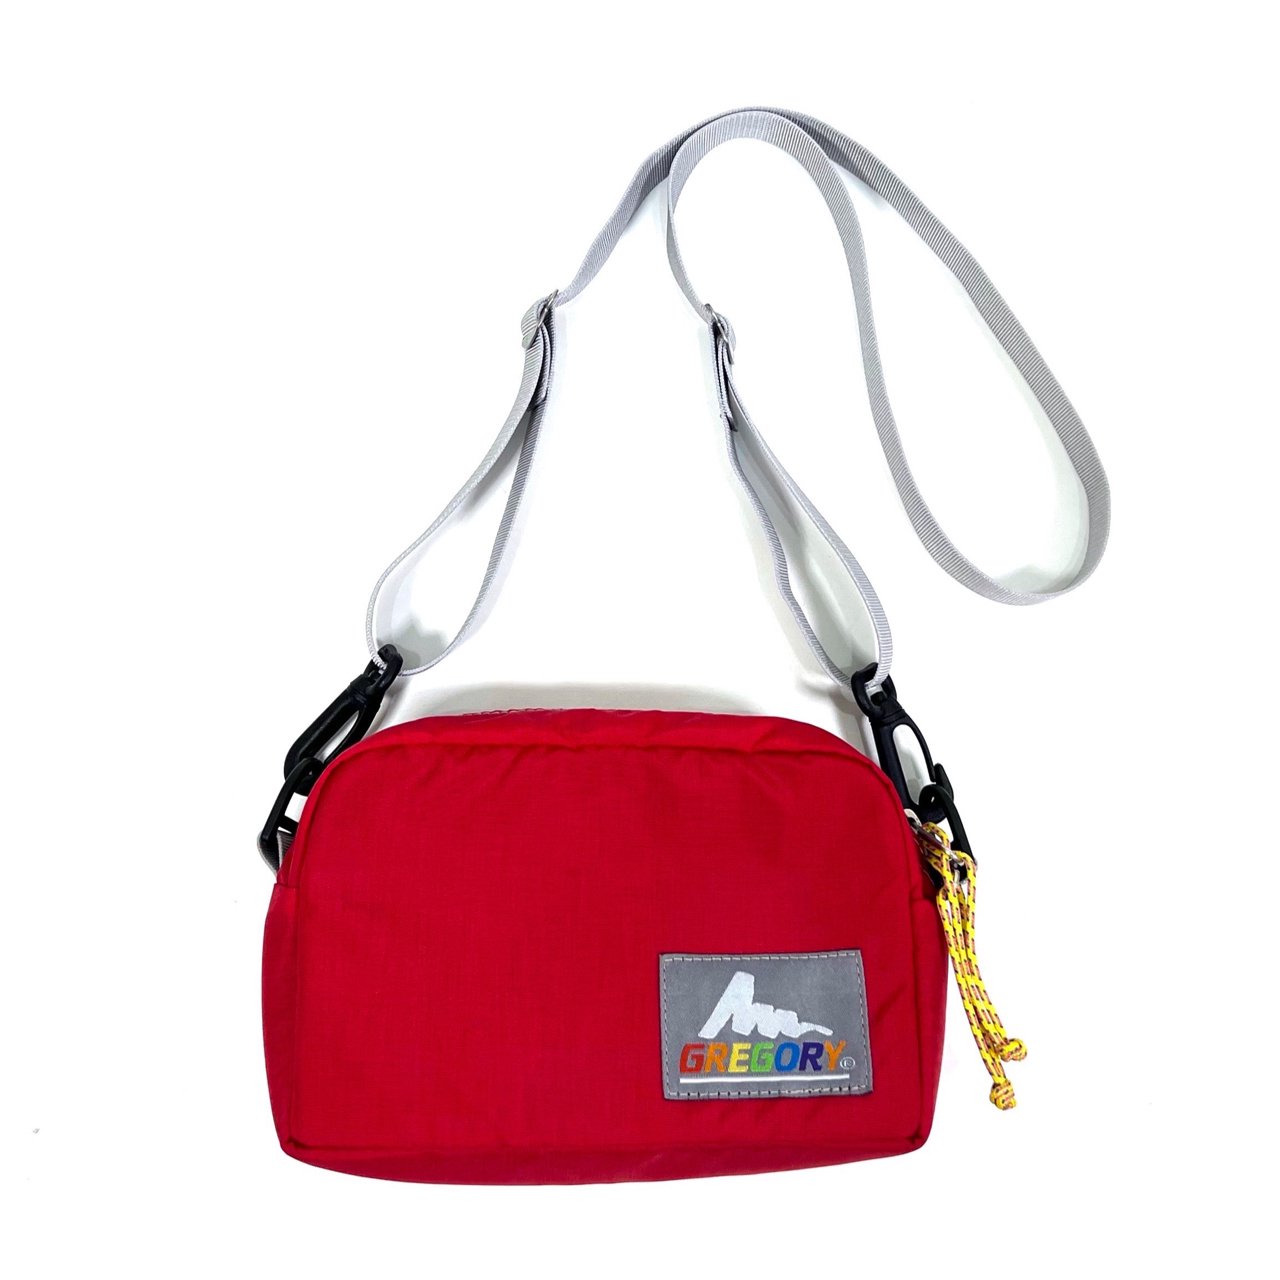 2010s GREGORY Padded Shoulder Pouch Red